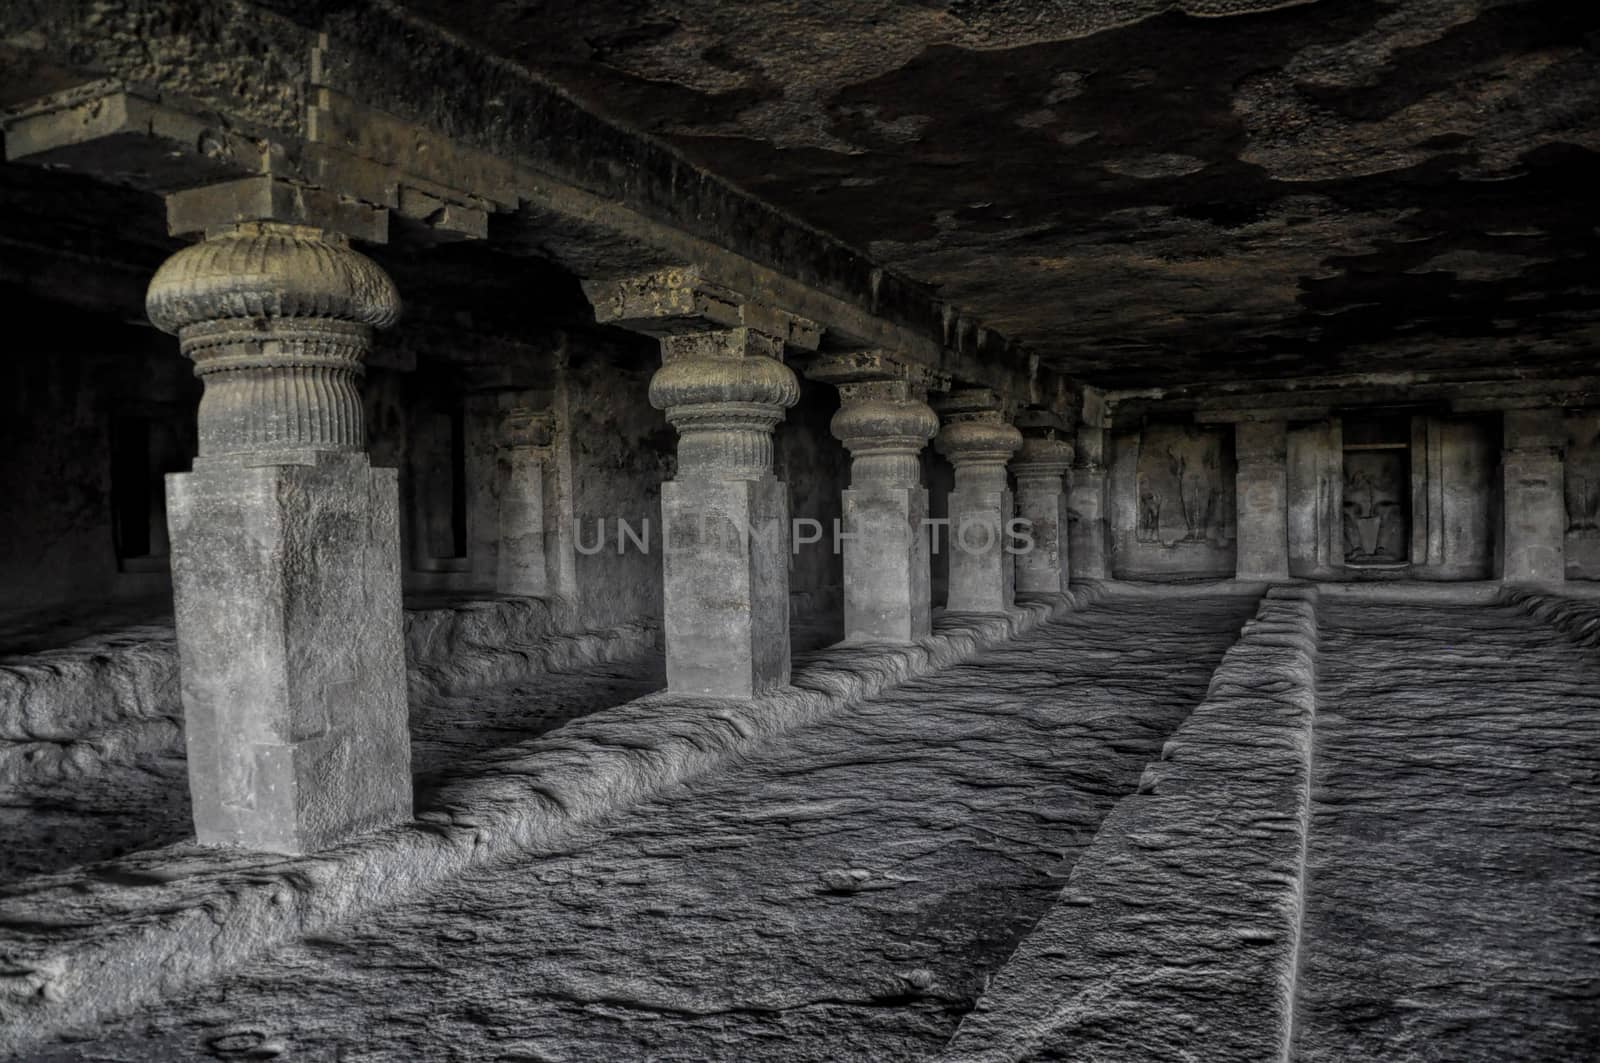 Ellora caves in India by MichalKnitl